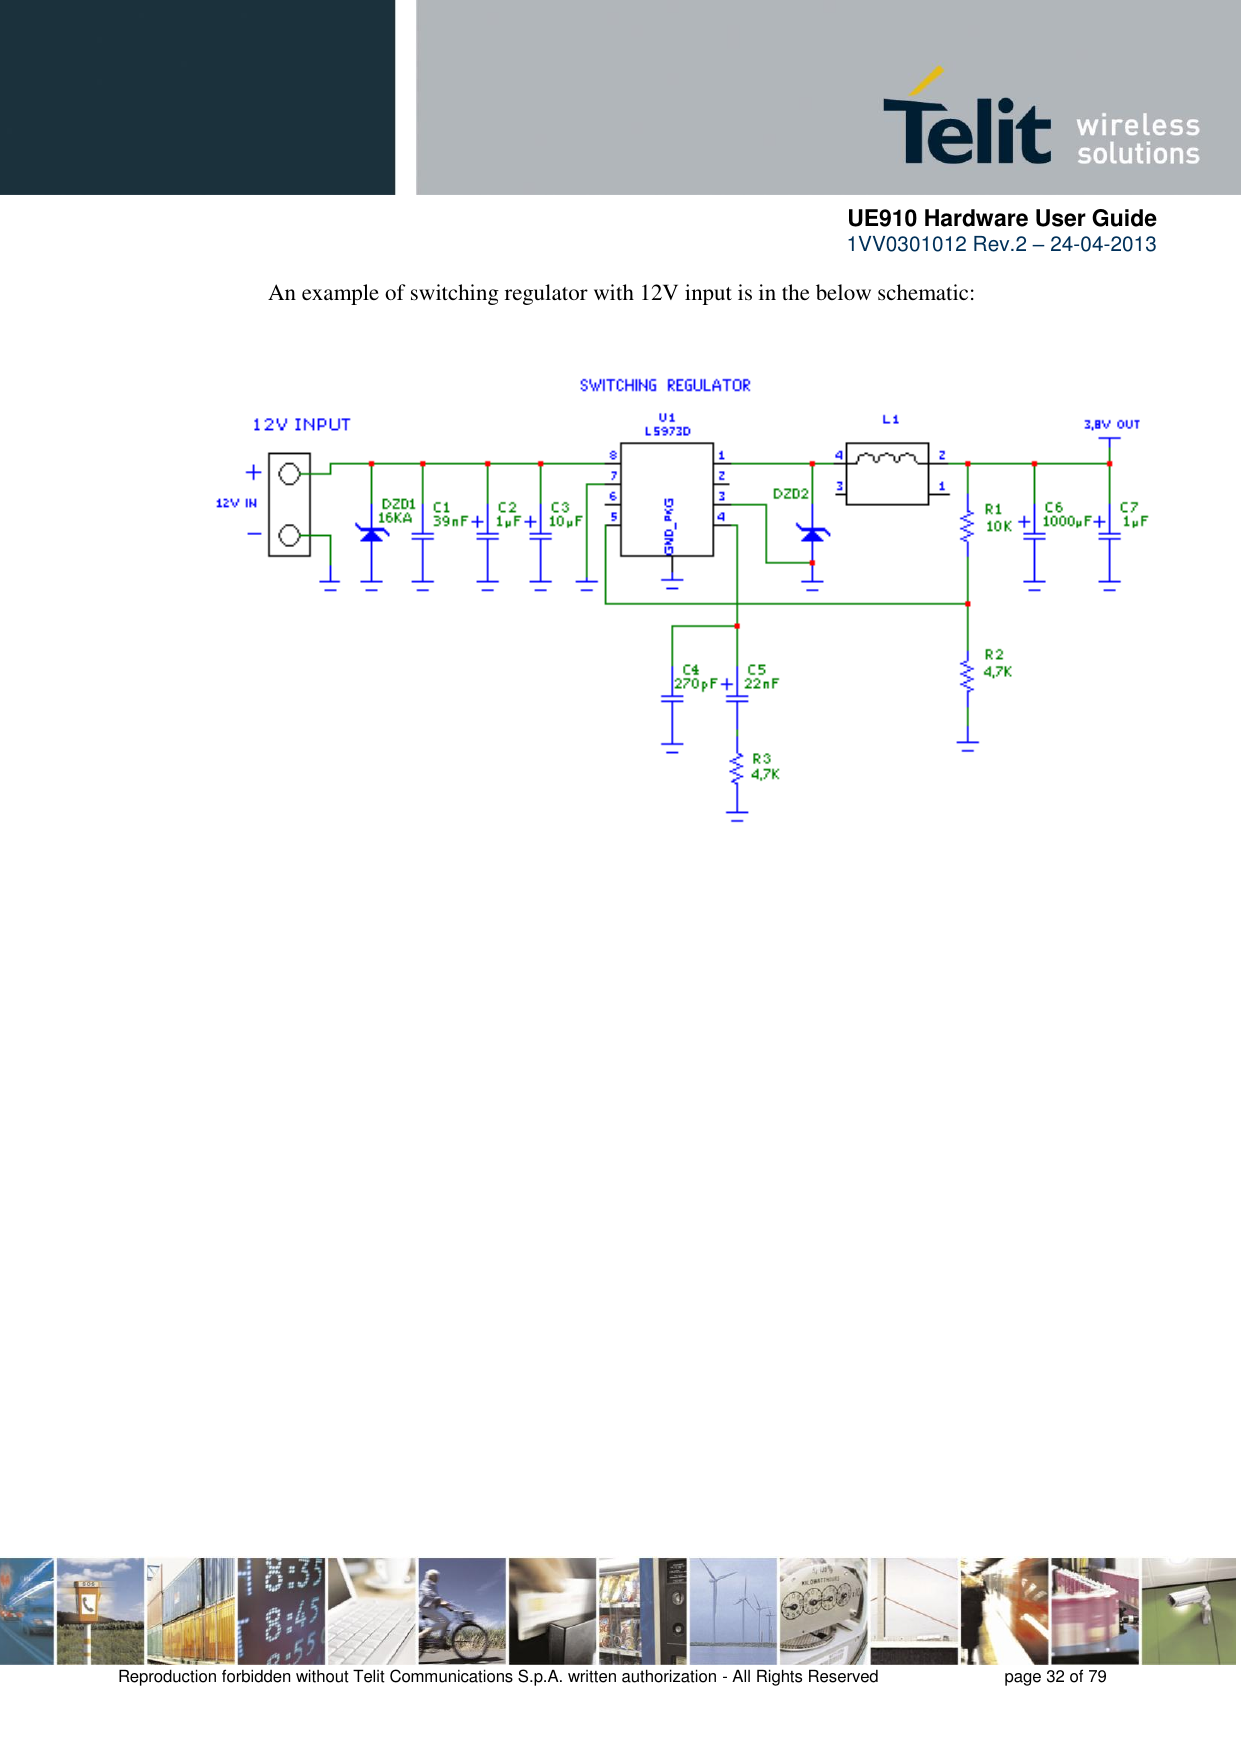      UE910 Hardware User Guide  1VV0301012 Rev.2 – 24-04-2013    Reproduction forbidden without Telit Communications S.p.A. written authorization - All Rights Reserved    page 32 of 79  An example of switching regulator with 12V input is in the below schematic: 